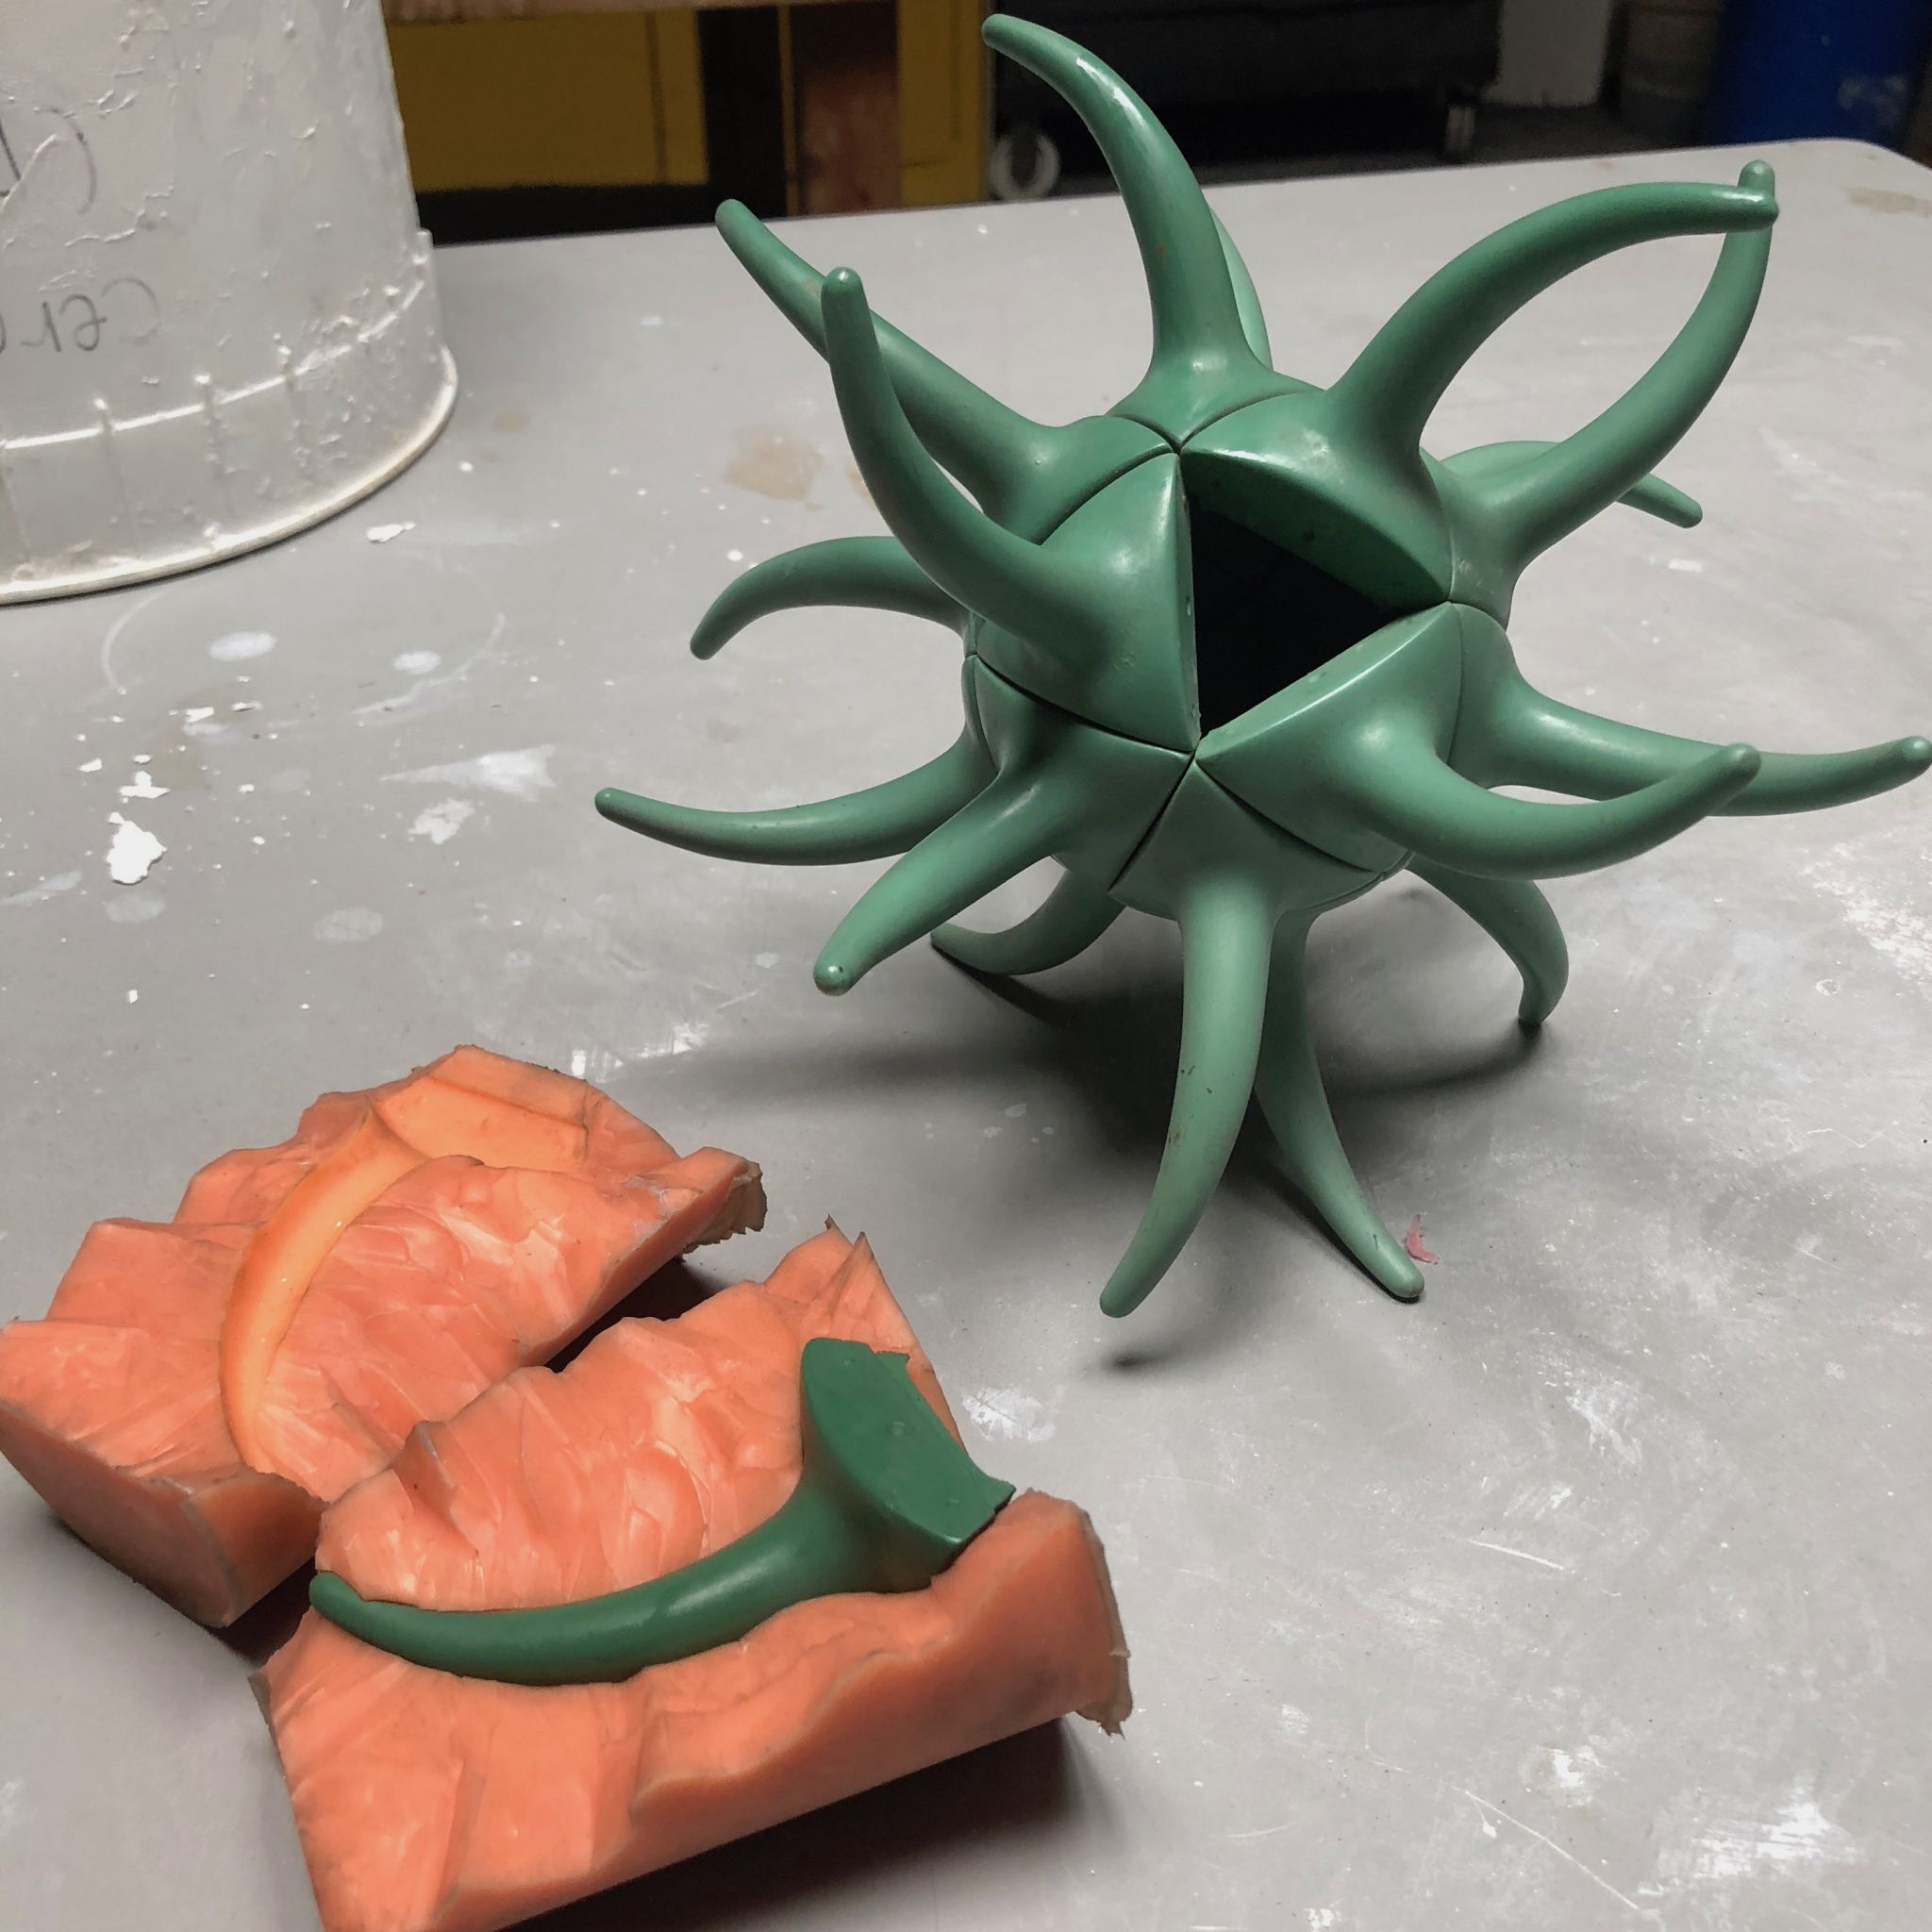 moldmaking and casting with plastic